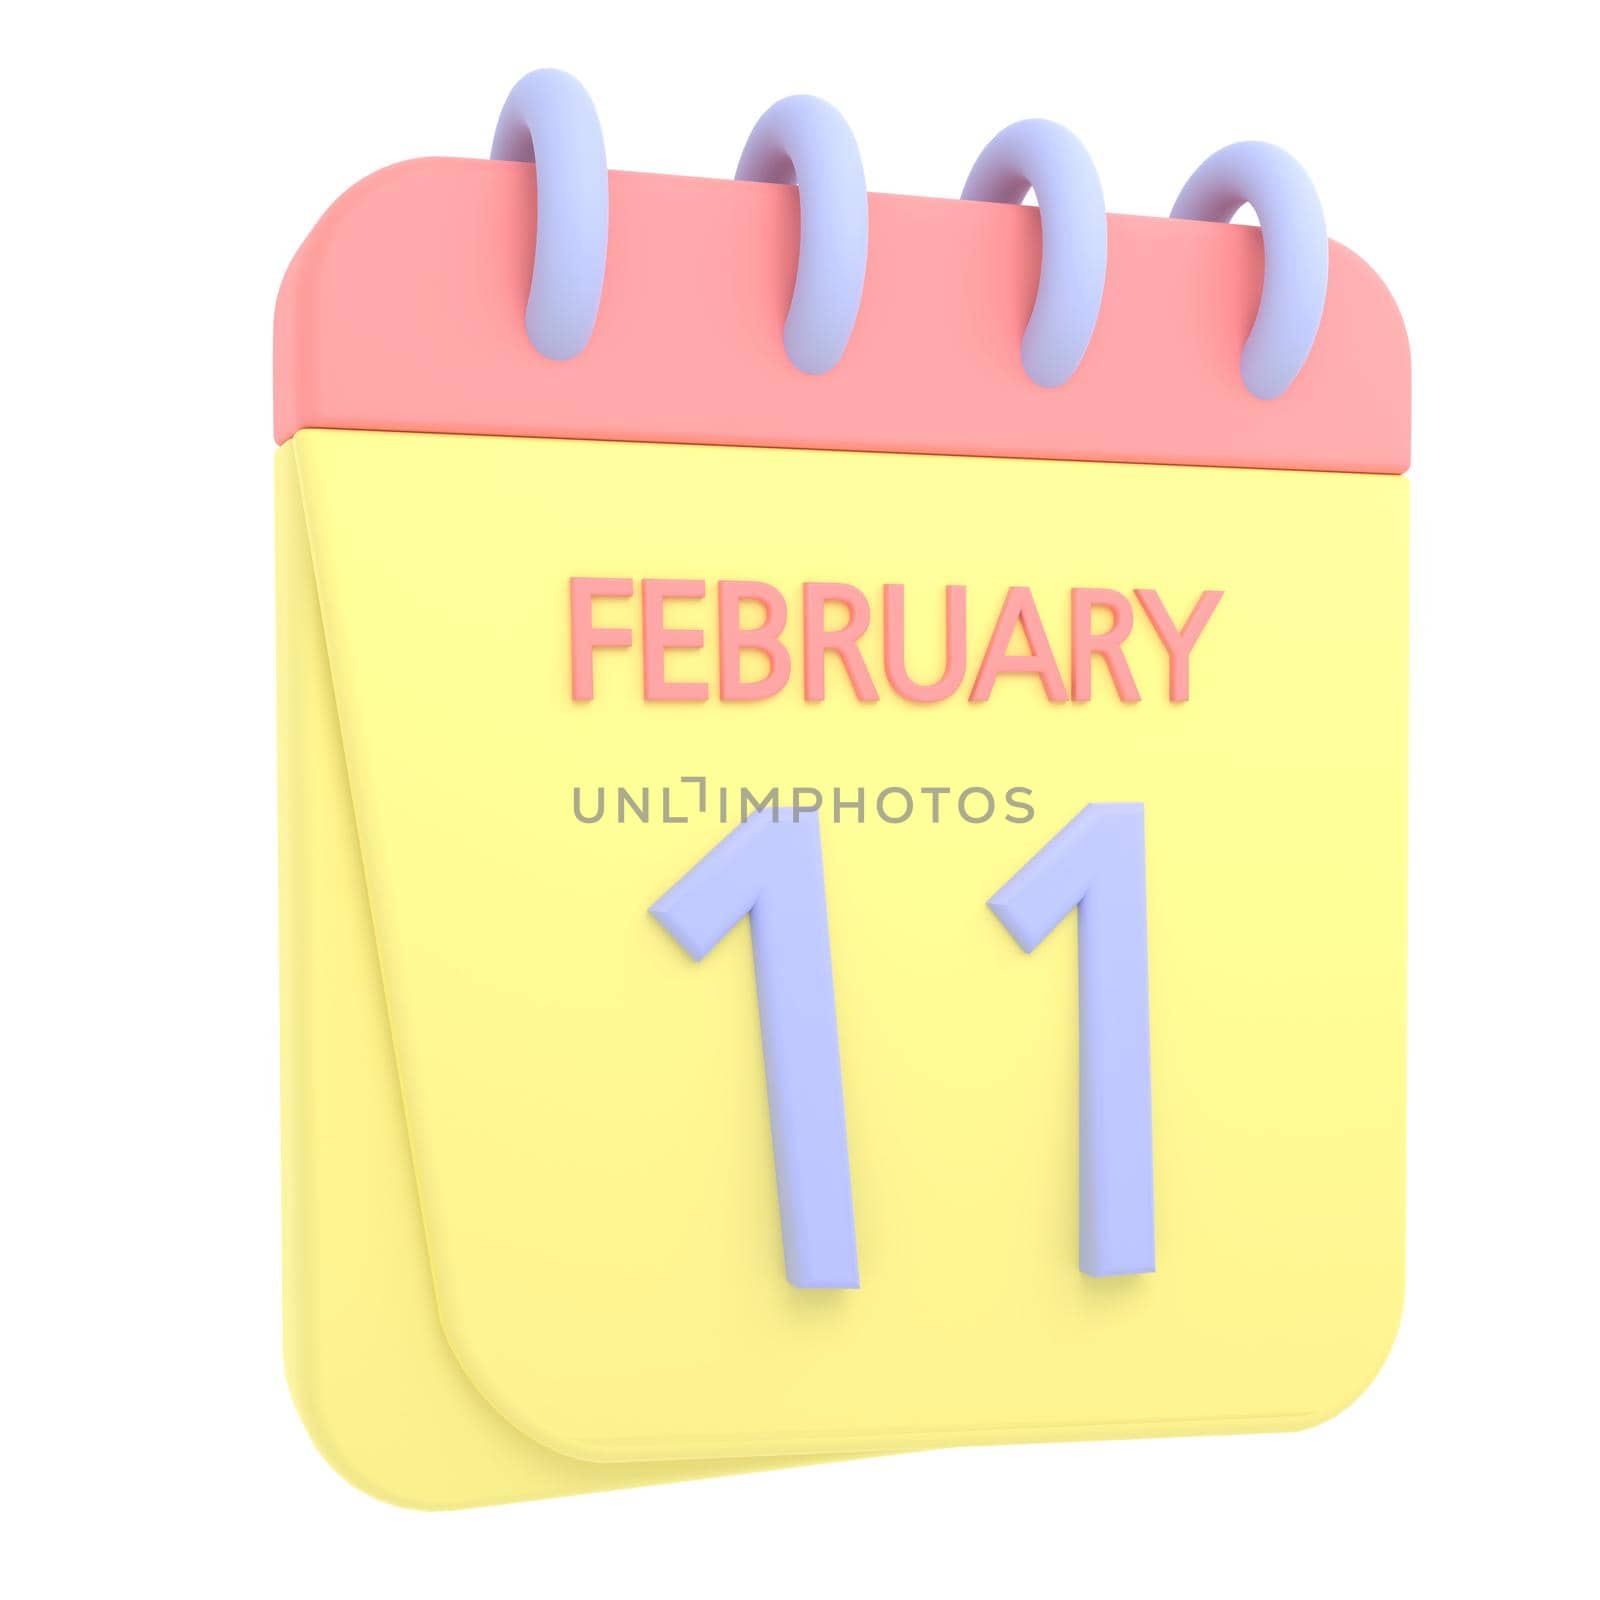 11th February 3D calendar icon. Web style. High resolution image. White background